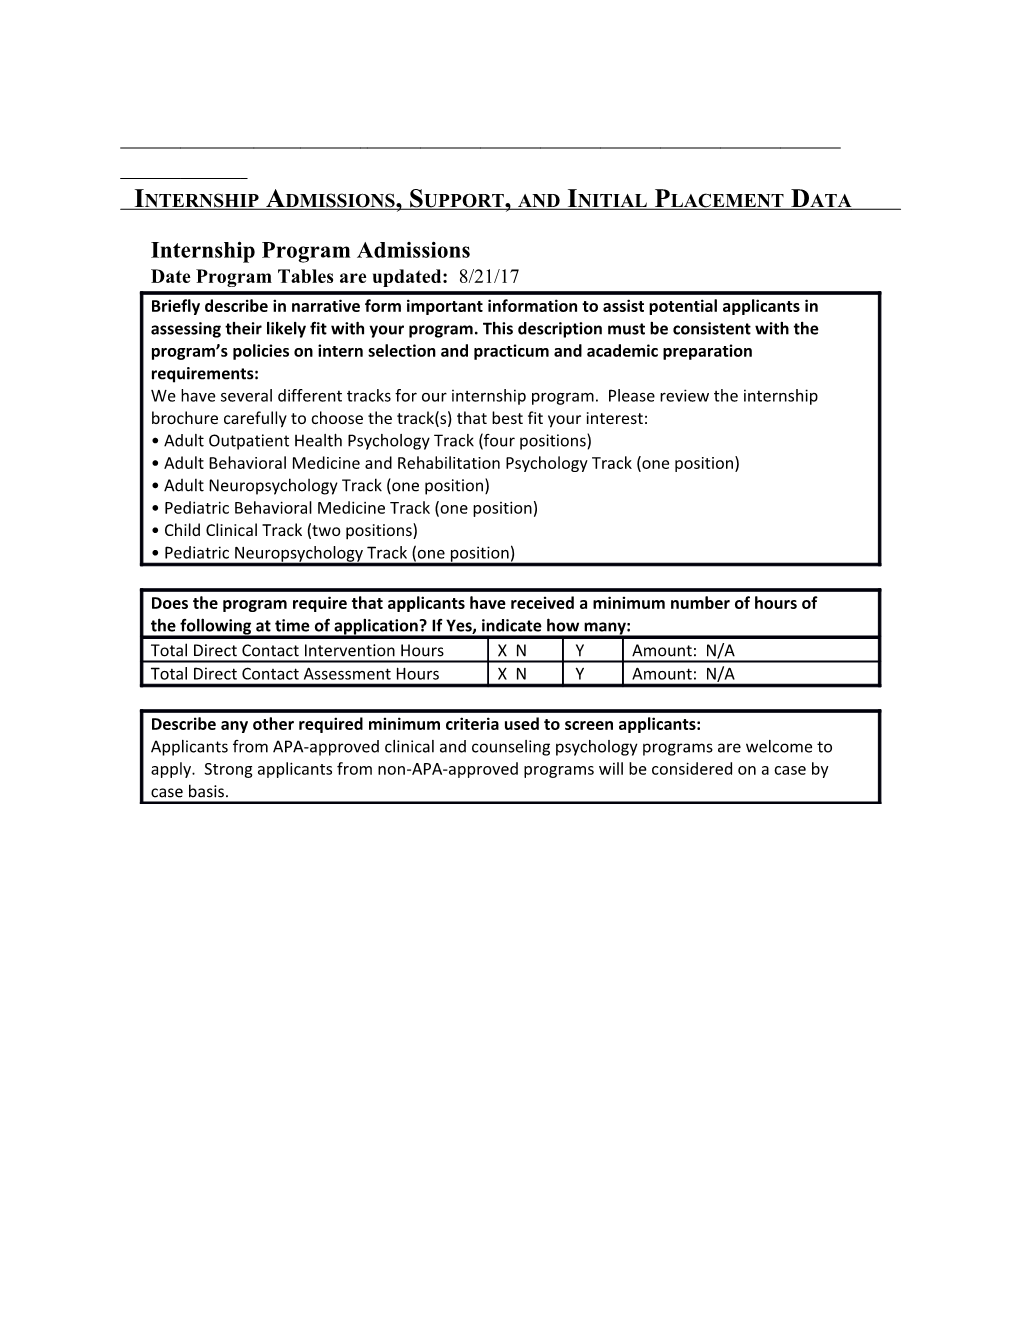 Internship Admissions, Support, and Initial Placement Data